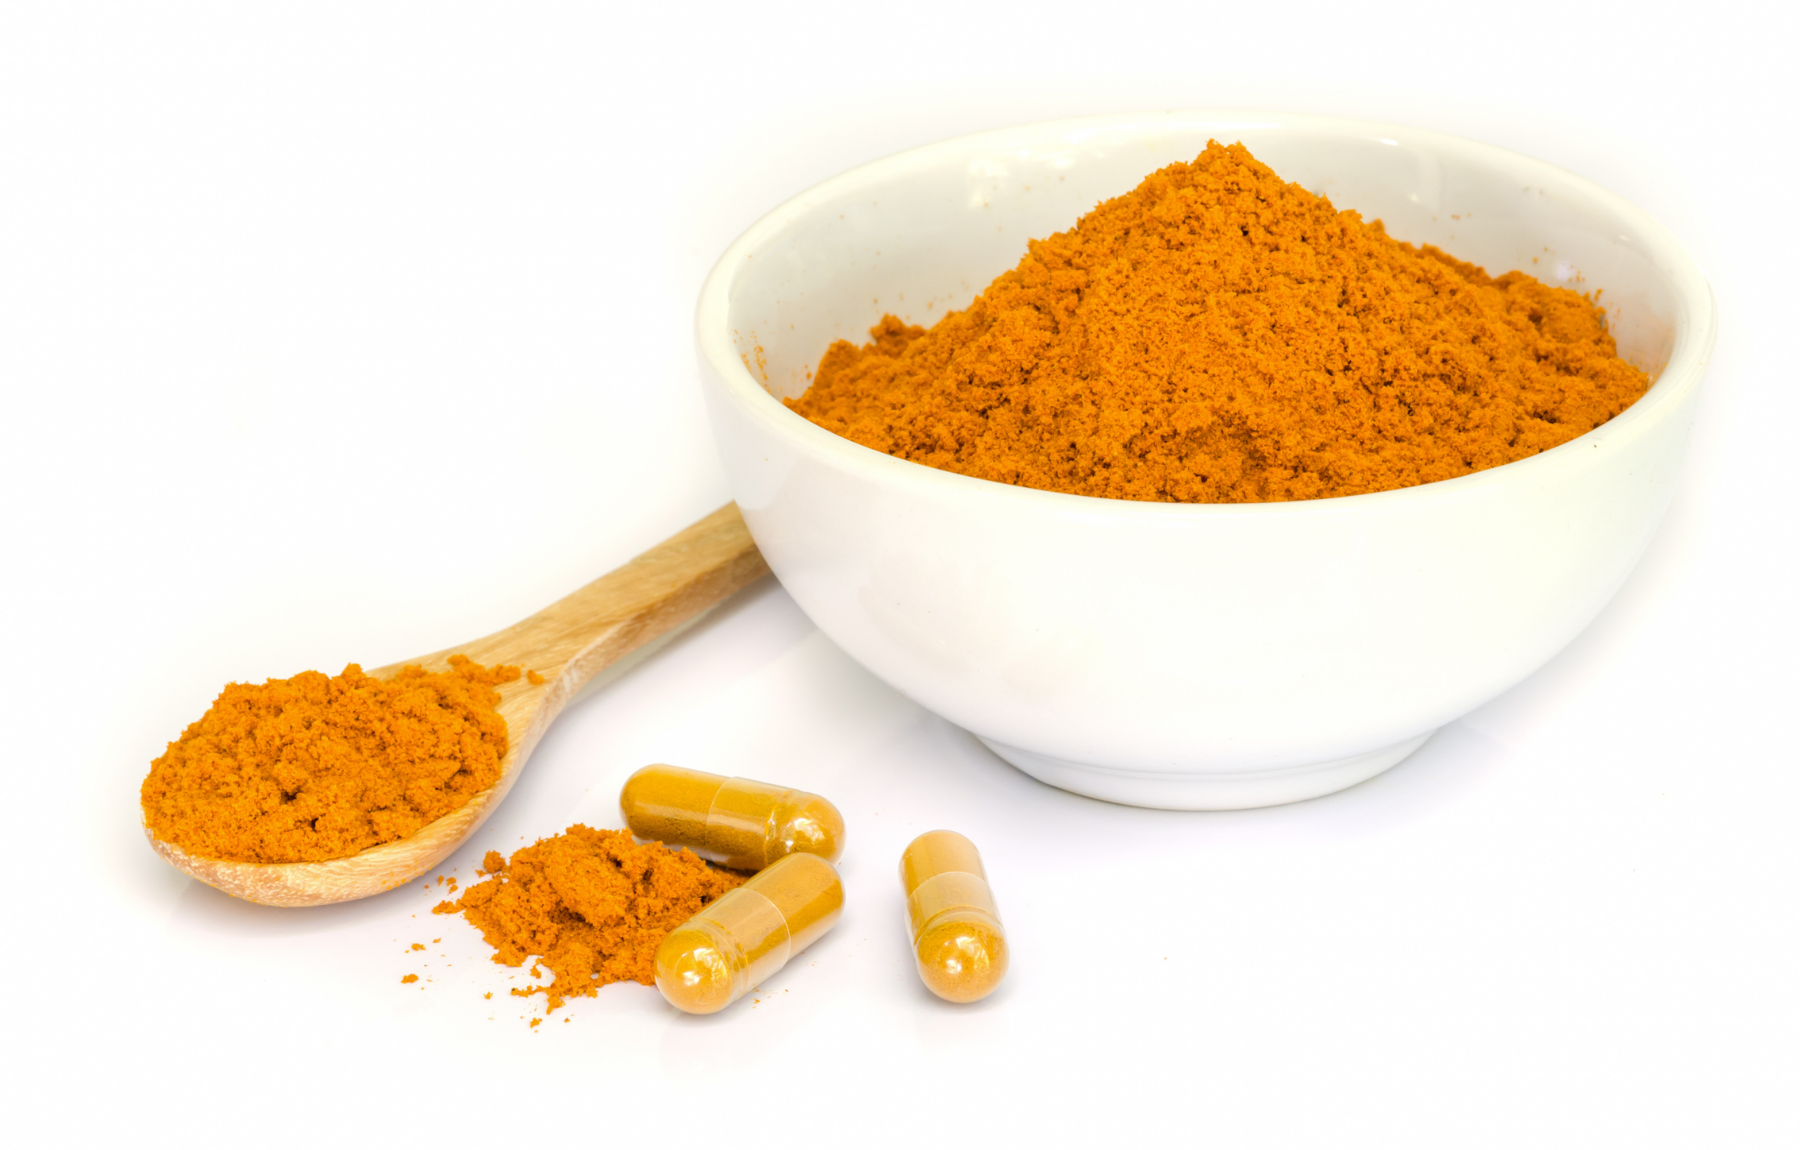 Small bowl full of orange powder, a wooden spoon and pill capsules  with the same powder lying next to the bowl